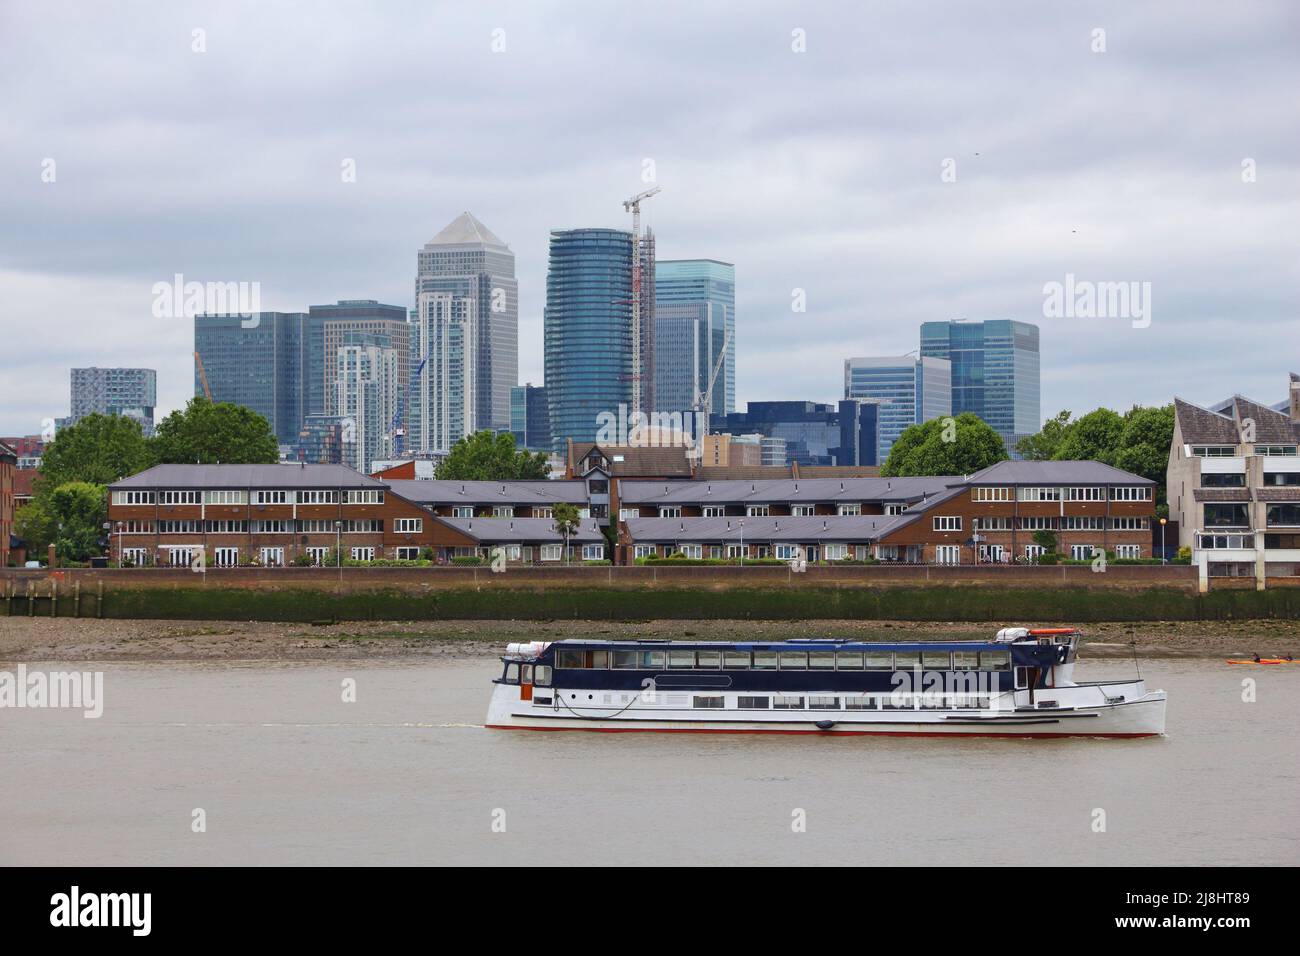 Canary Wharf and London Docklands seen from Greenwich district of London UK. Tour boat on river Thames. Stock Photo